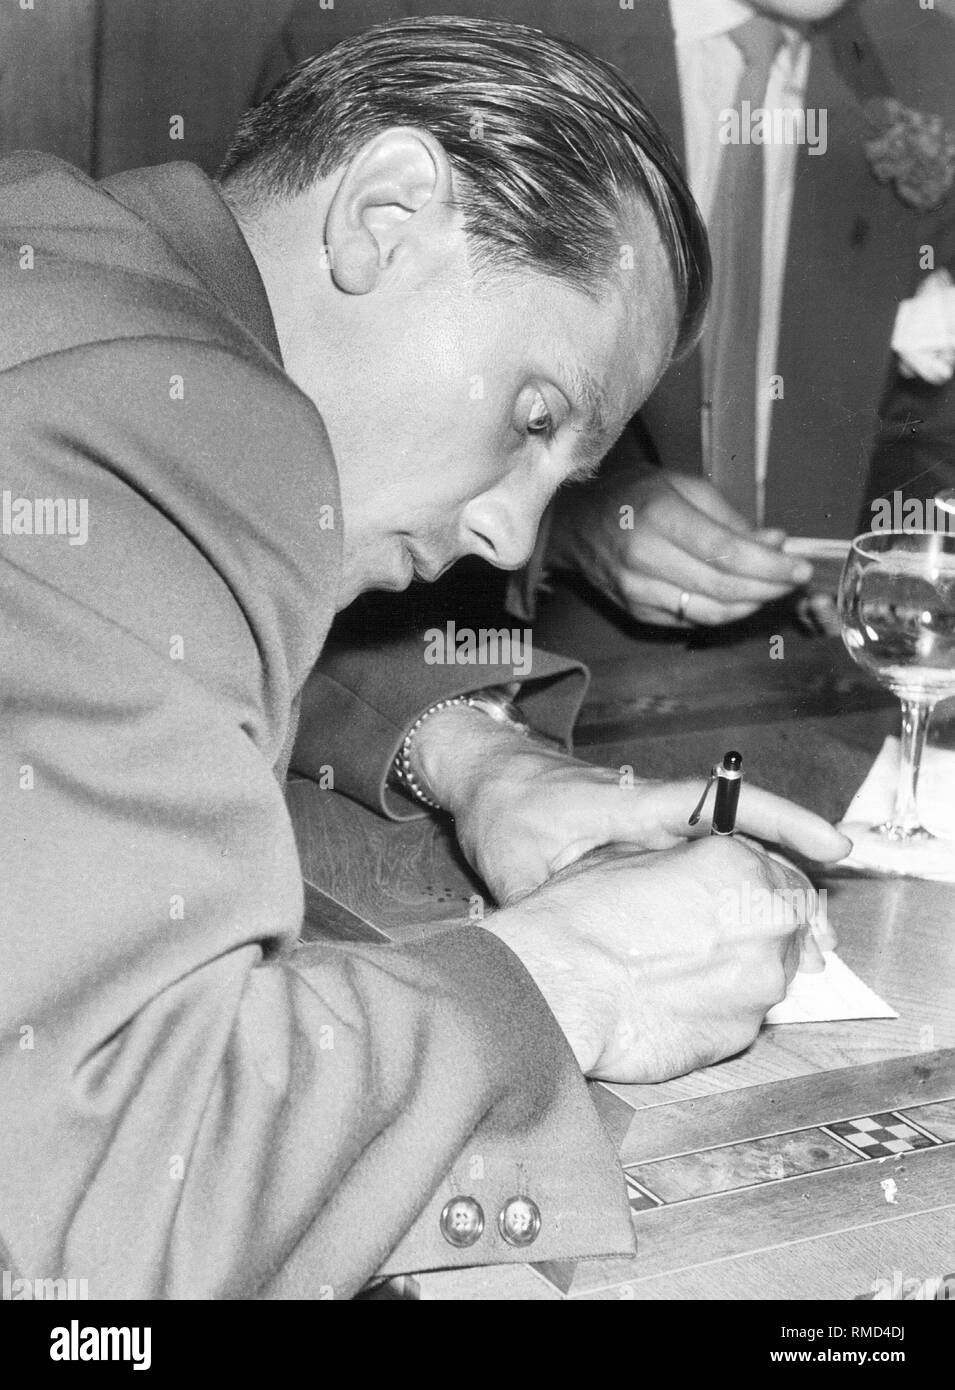 After winning its first World Cup, in 1954 the German national team was invited for a reception in Lindau. Here, Max Morlock gives autographs. Stock Photo